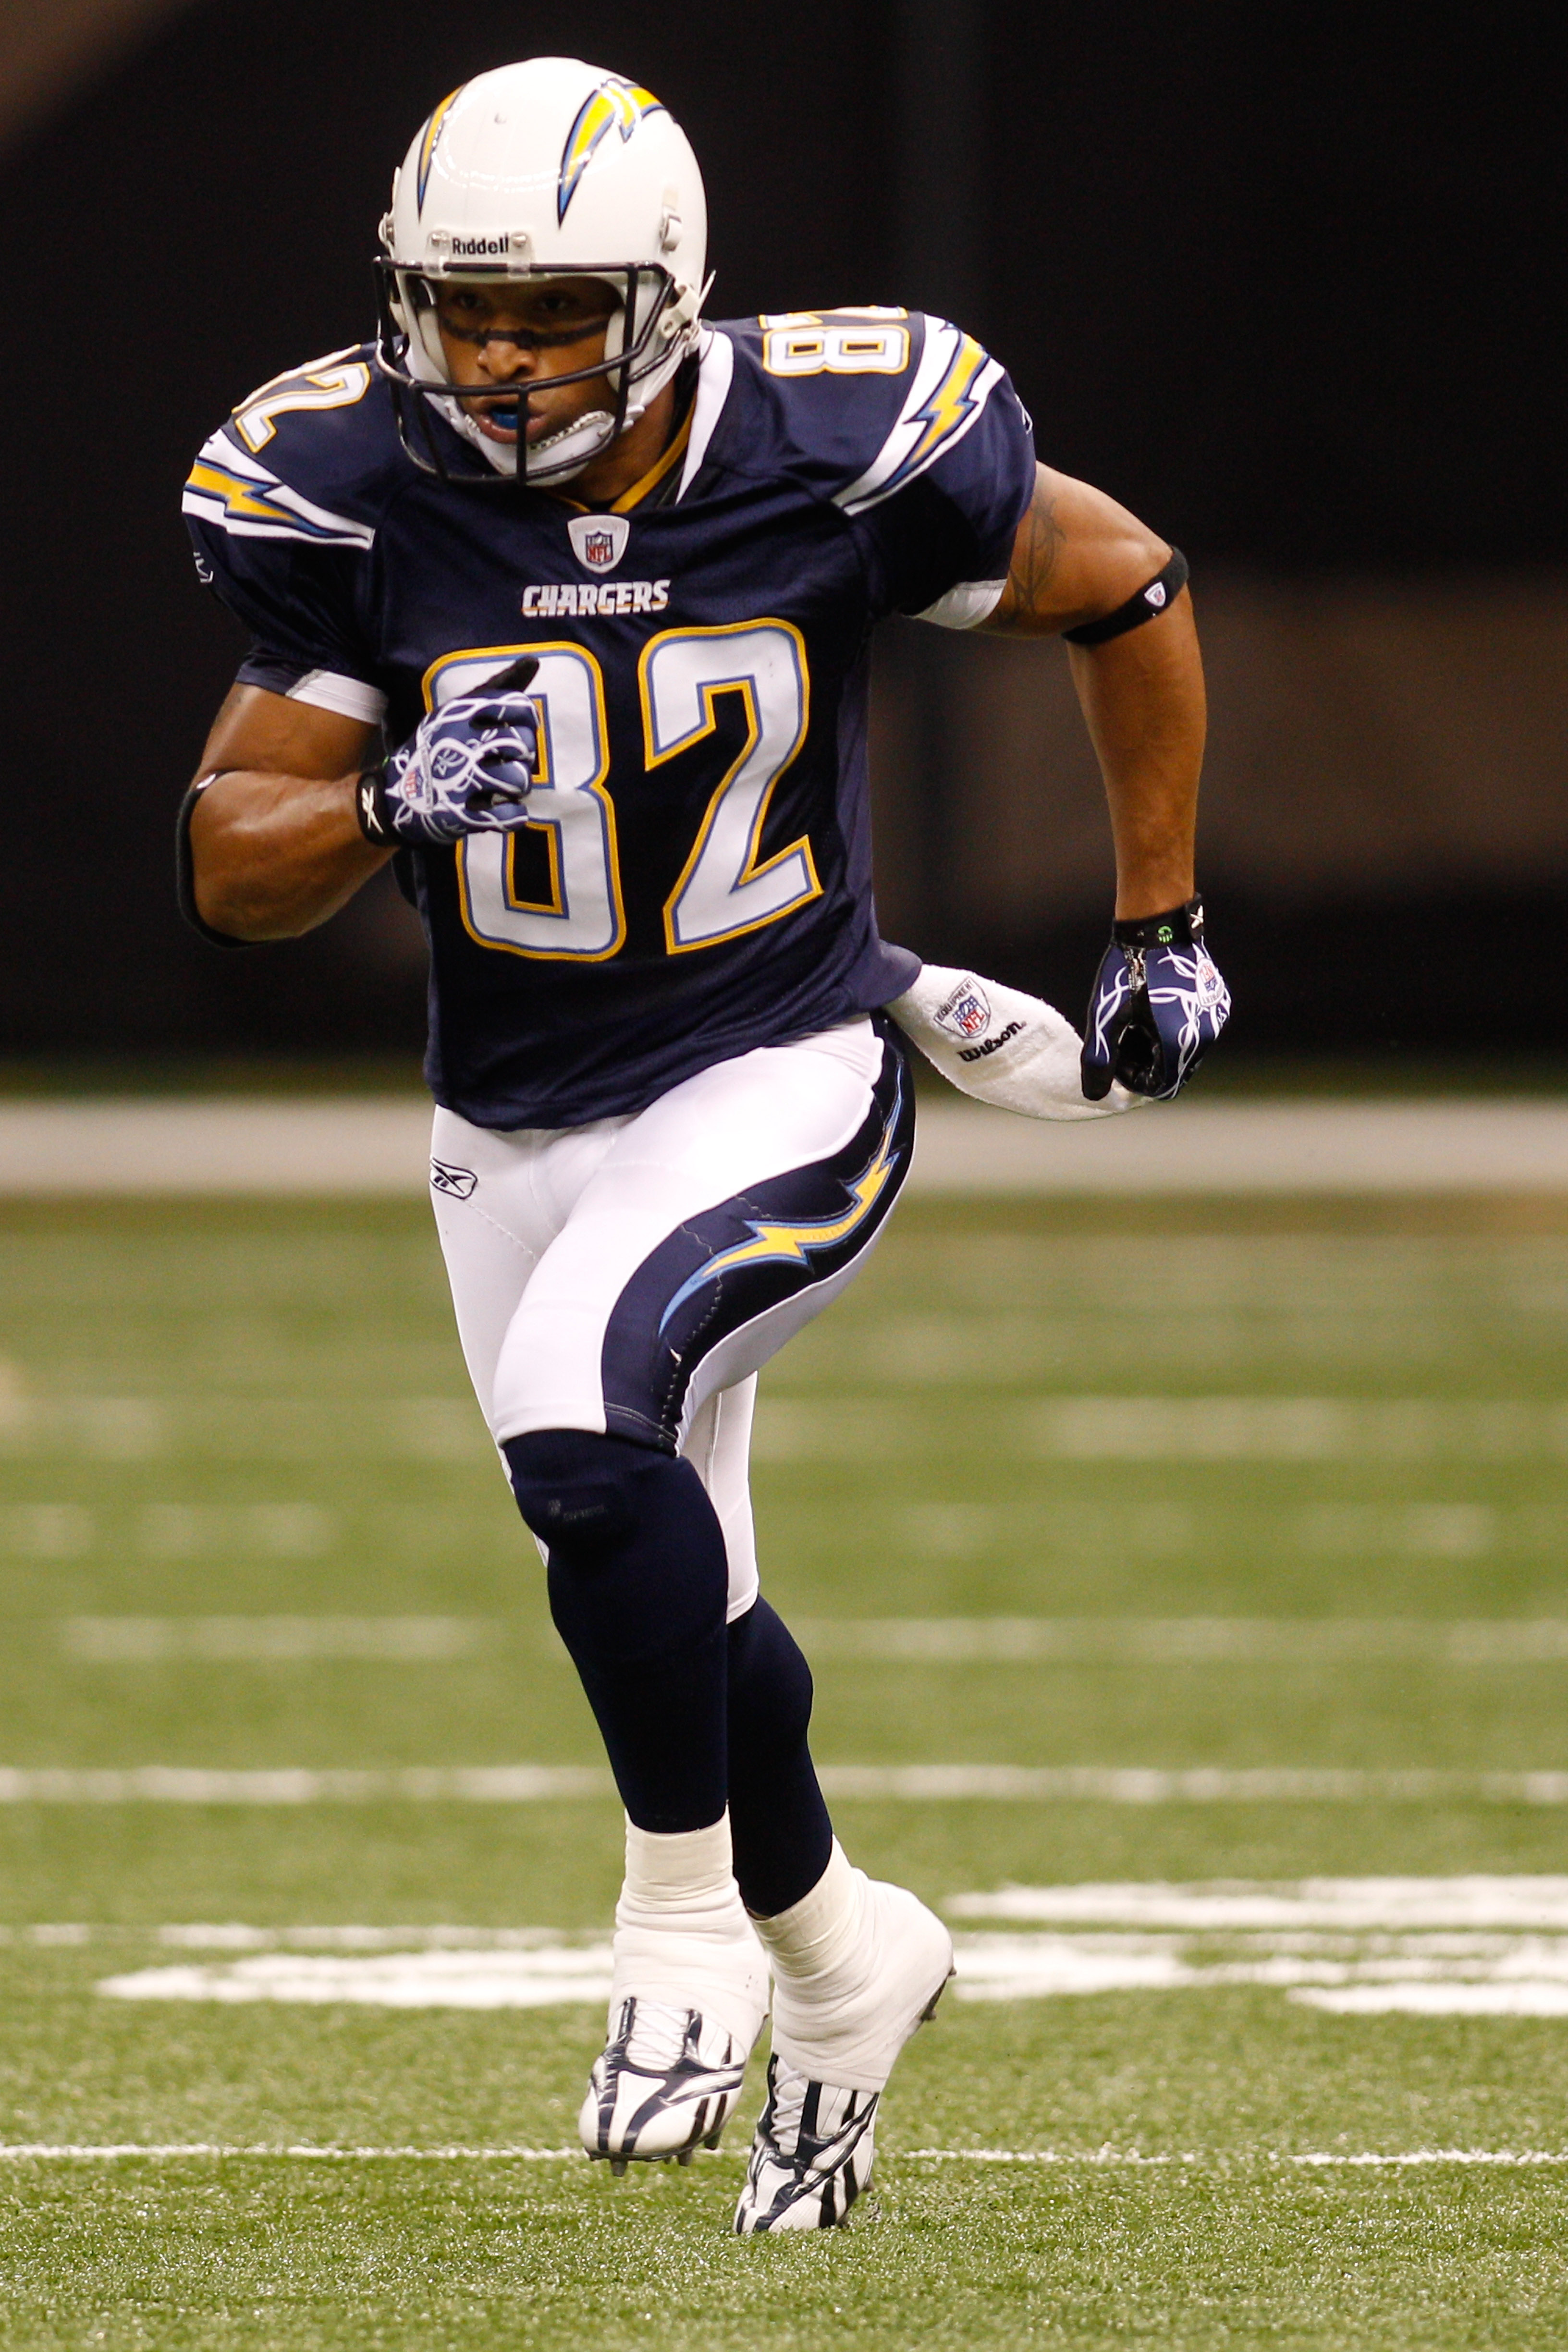 NEW ORLEANS - AUGUST 27:  Josh Reed #82 of the San Diego Chargers in action against the New Orleans Saints at the Louisiana Superdome on August 27, 2010 in New Orleans, Louisiana.  (Photo by Chris Graythen/Getty Images)